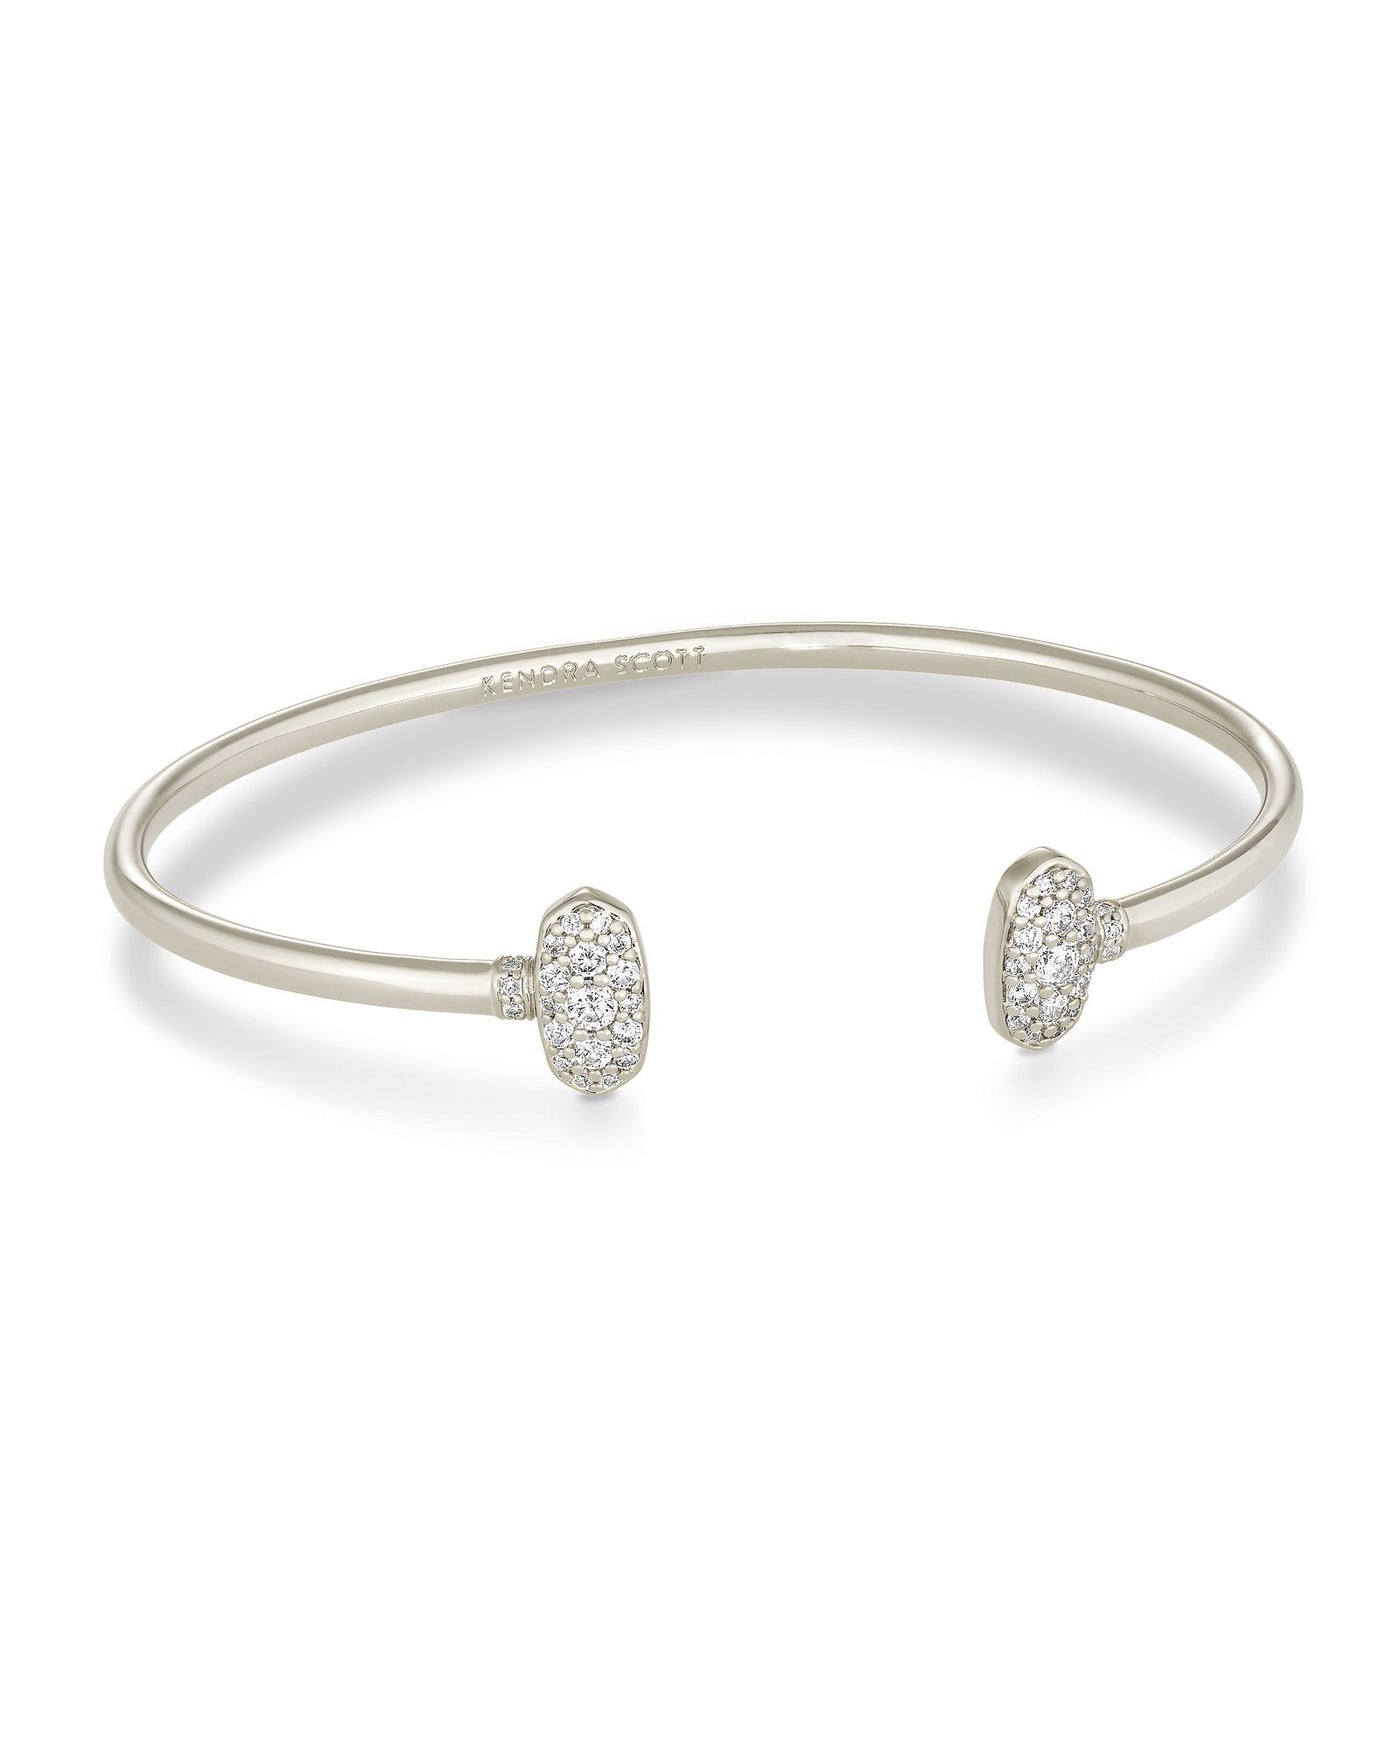 Kendra Scott Grayson Crystal Cuff Bracelet-Bracelets-Kendra Scott-Market Street Nest, Fashionable Clothing, Shoes and Home Décor Located in Mabank, TX